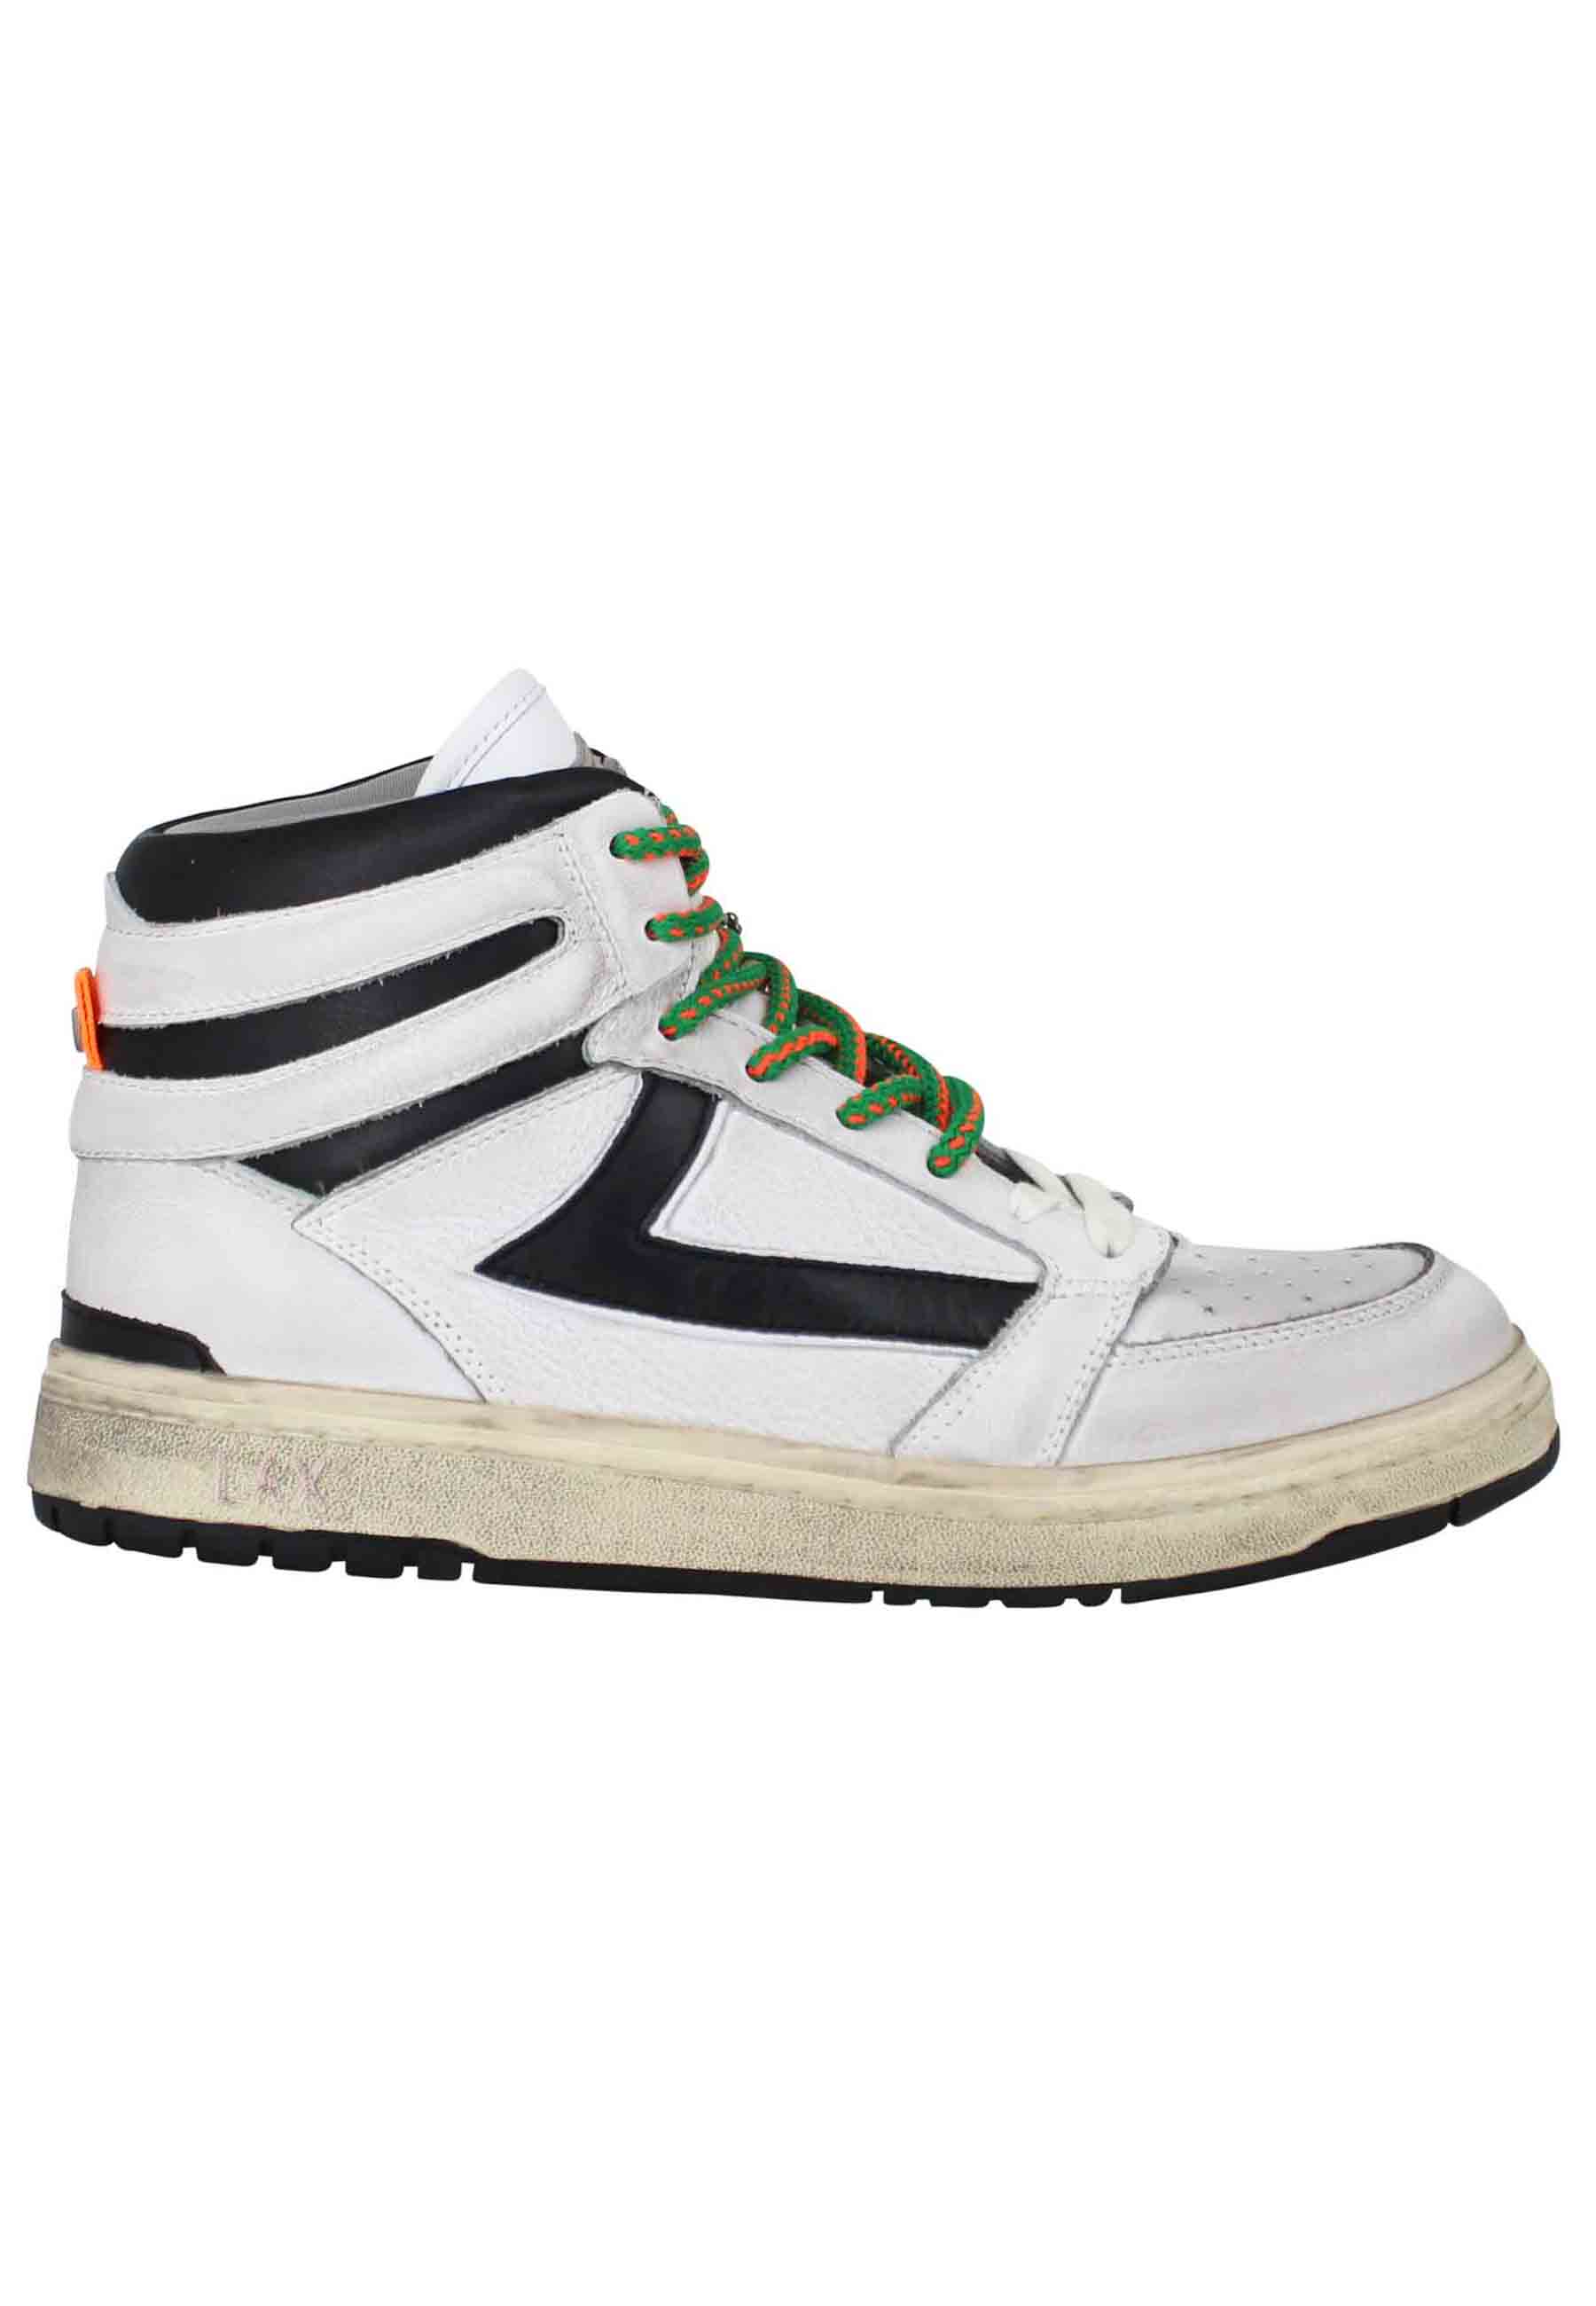 Starlight Vintage High men's sneakers in white leather with black leather inserts